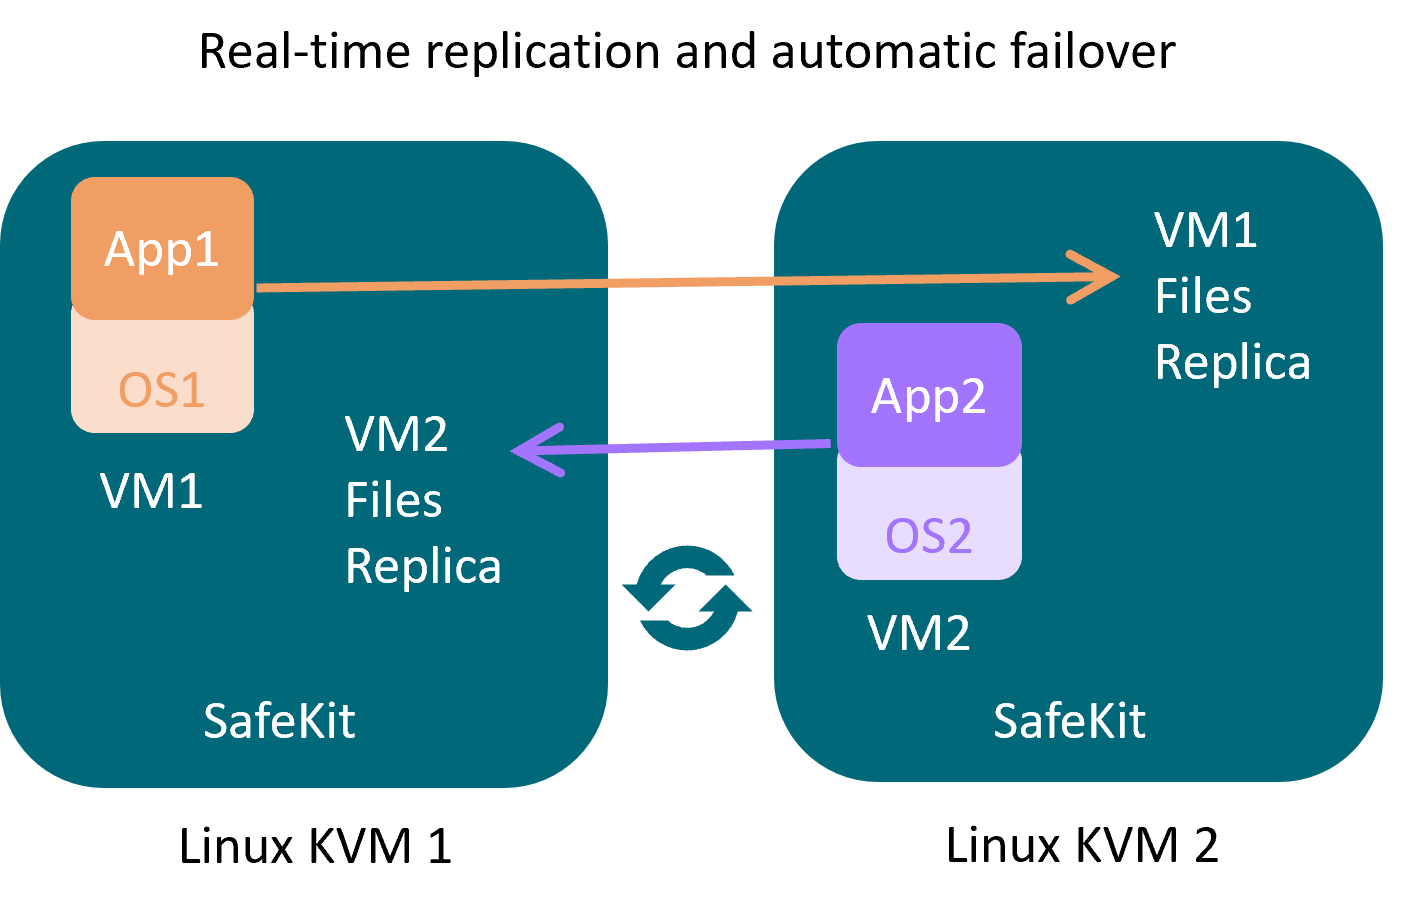 [SafeKit] A KVM cluster without shared storage on a SAN